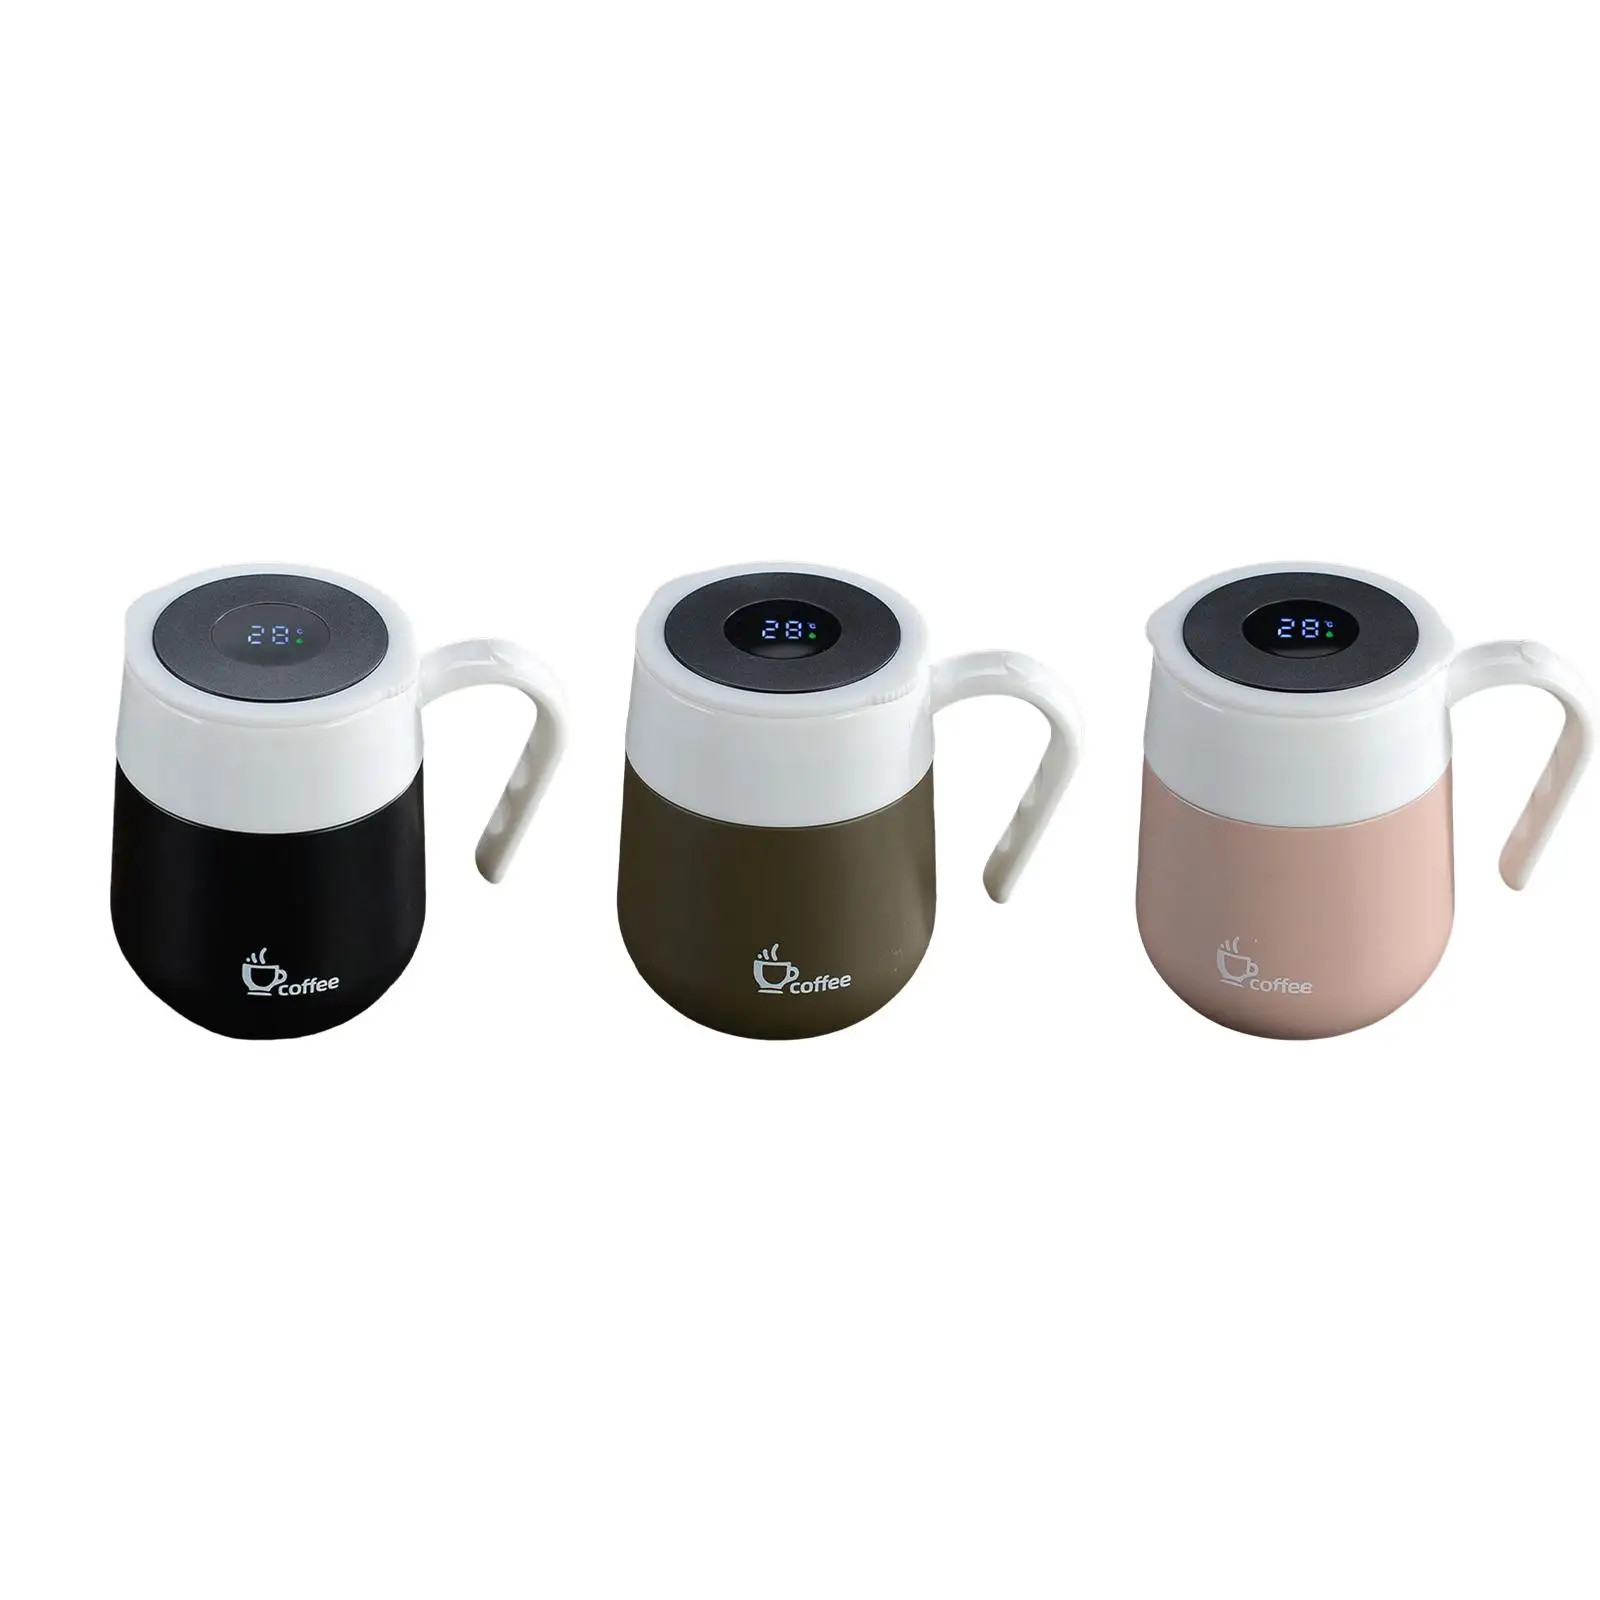 Vacuum Insulated Mug, Double Walled 460ml with Intelligent Temperature Display Travel Mug for Office 